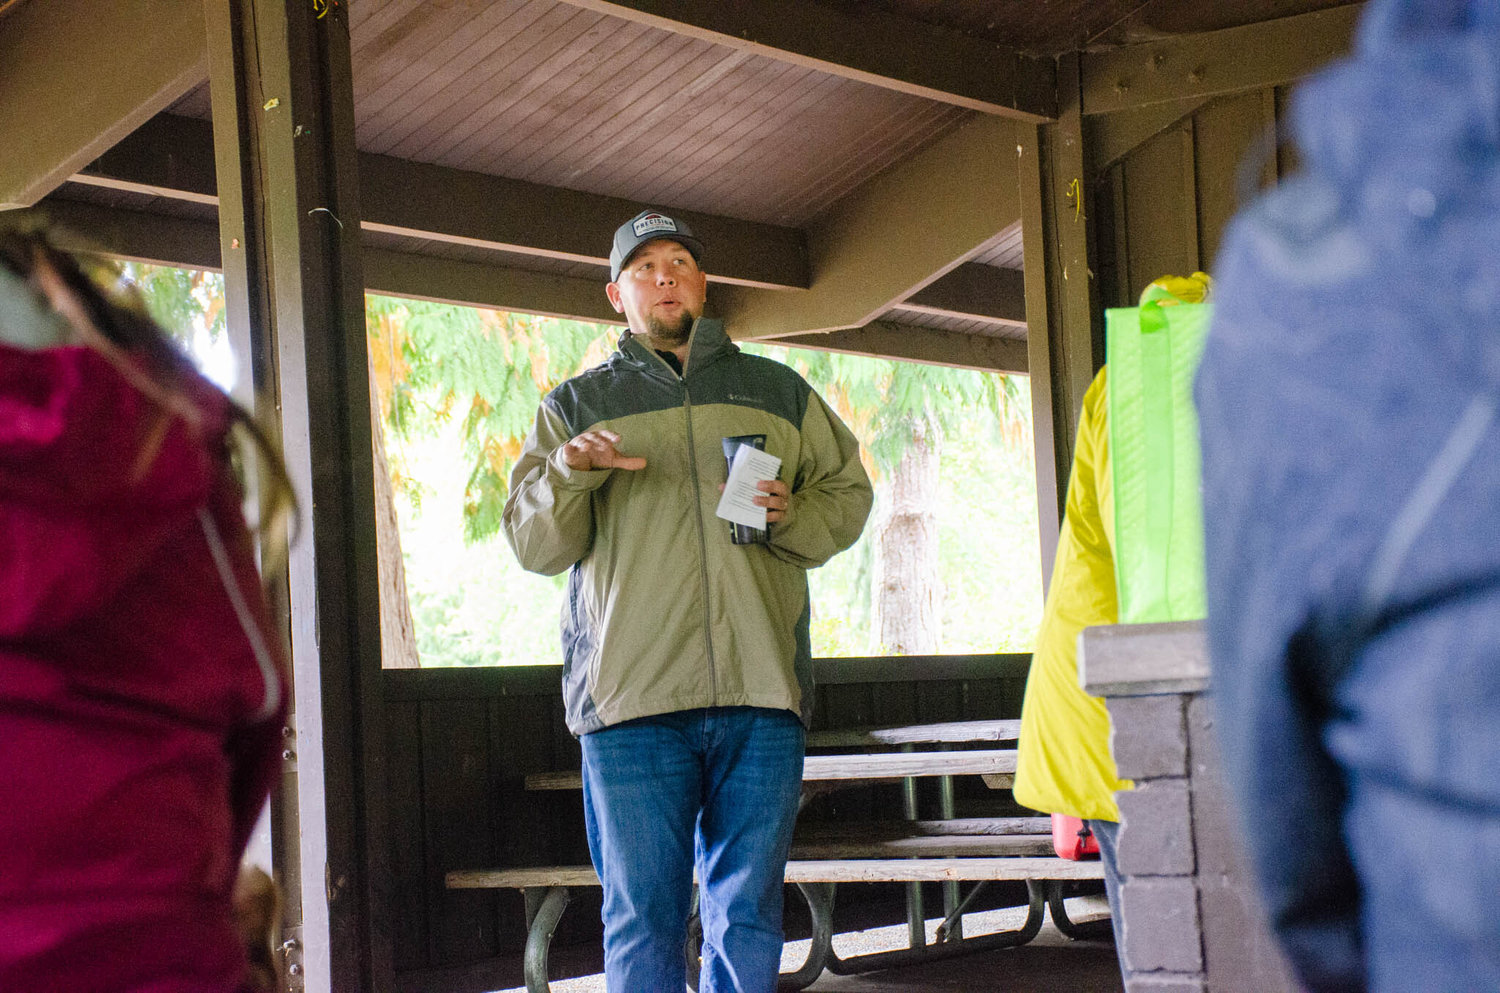 Cody Duncan, a manager with TransAlta Centralia Generation, speaks with Thurston County League of Women Voters and Sierra Club members Wednesday about the role his company takes in utilizing streamflow along the Skookumchuck River and how the reservoir dam regulates flow.